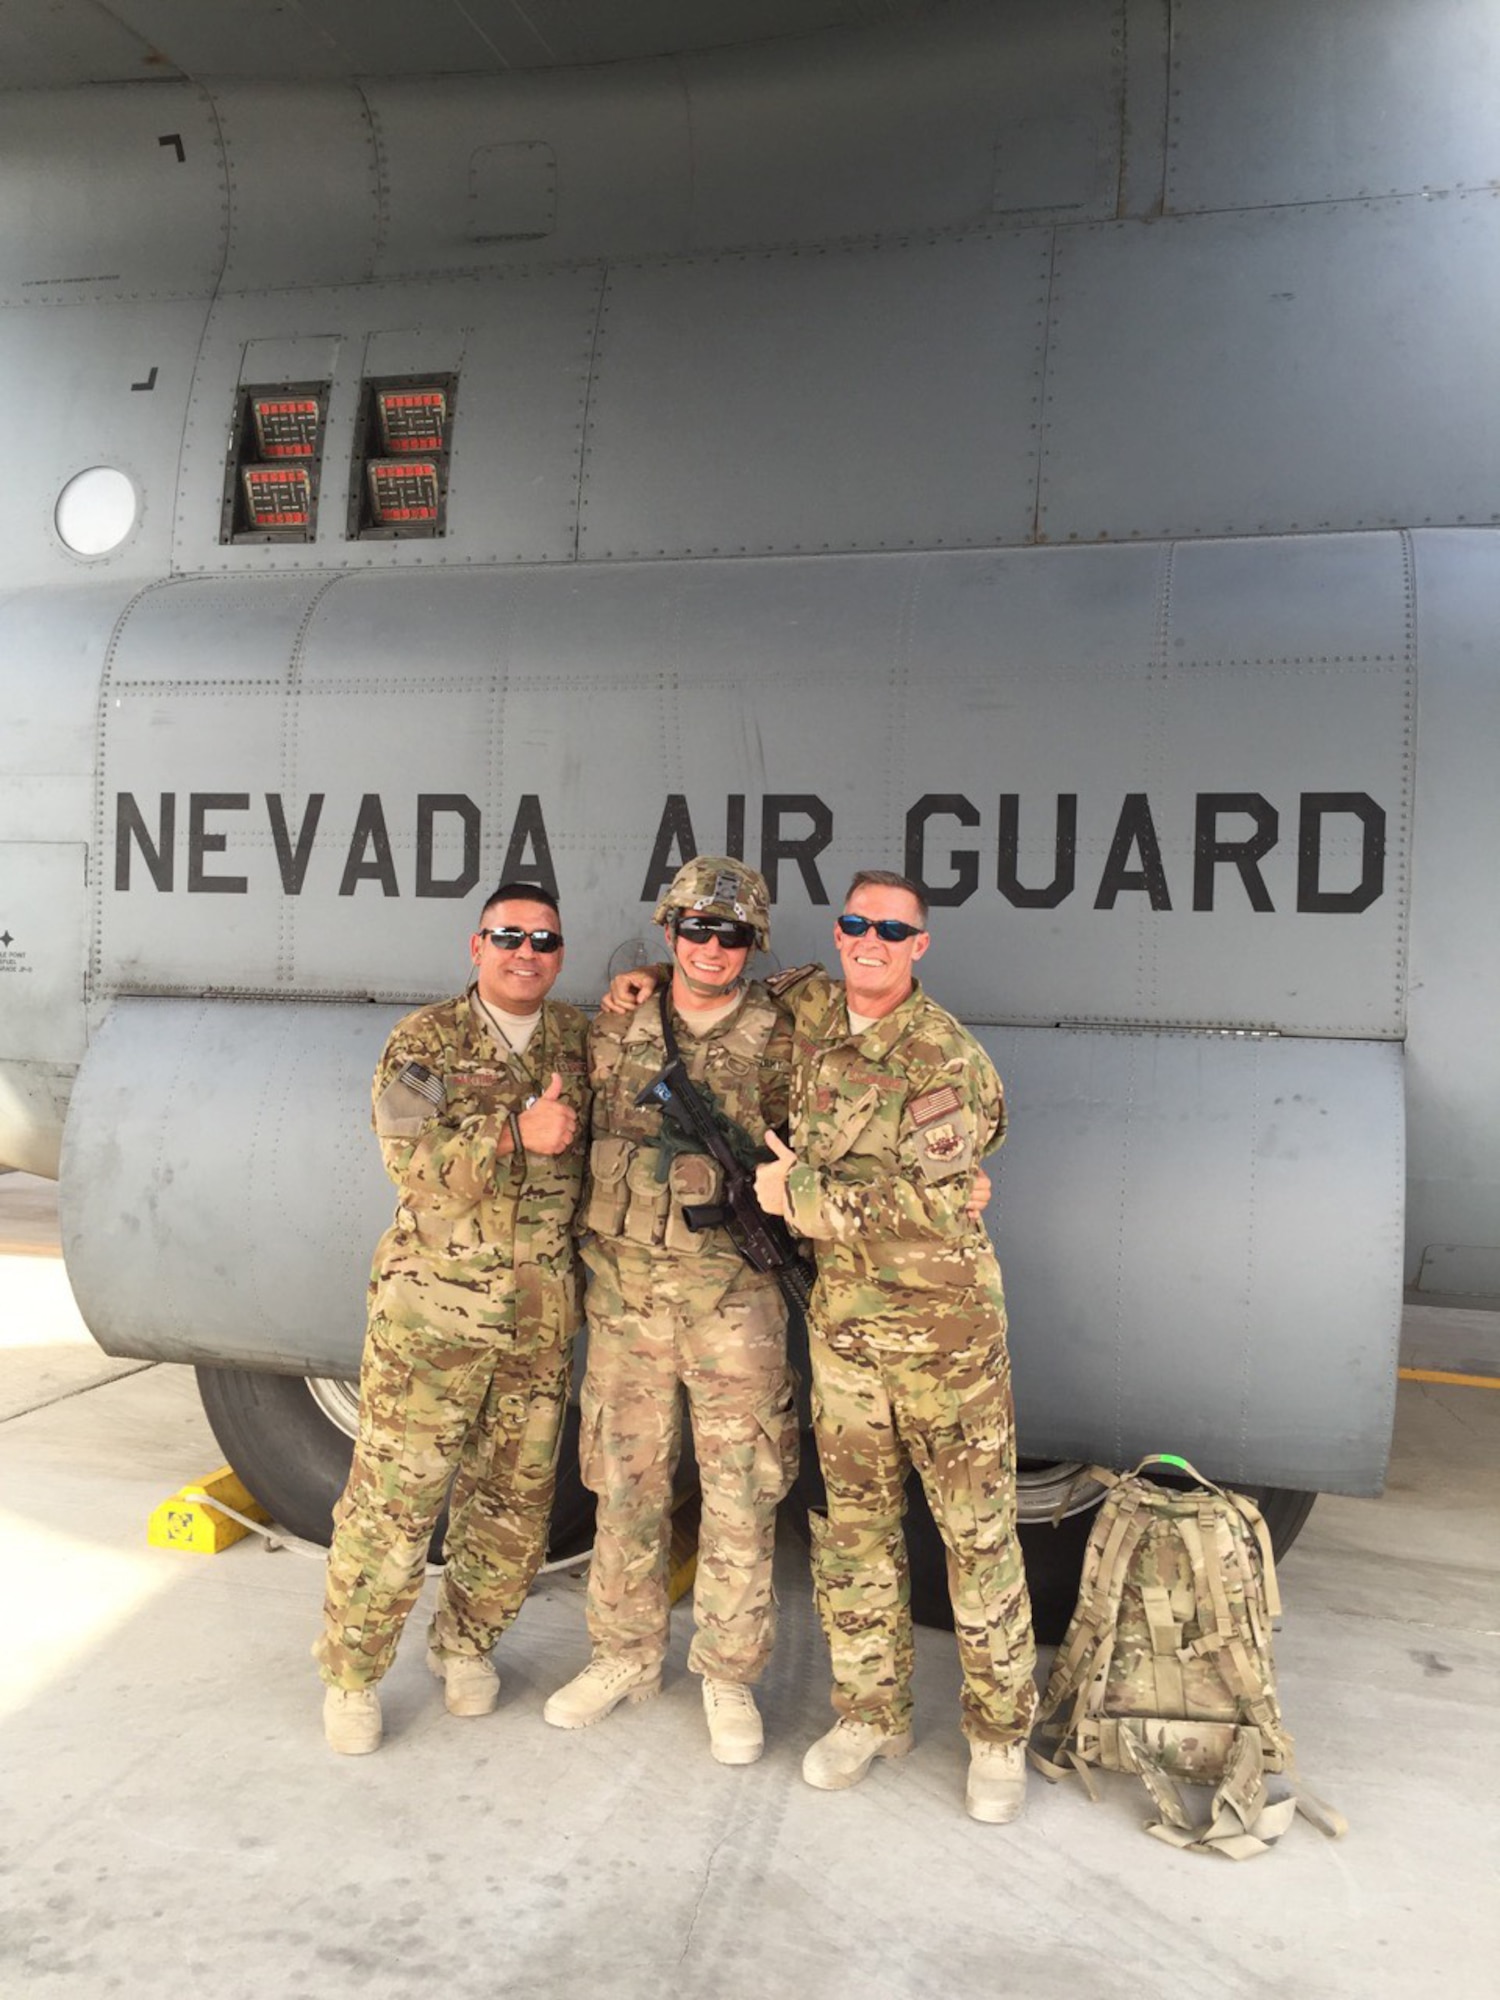 Nevada Air Guardsmen, Chief Master Sgts. Robert Martinez and Thomas Glover giving a proper “send-off” to Glover’s son, Army Pvt. Colter Glover, before his first deployment. Photo by Air Force Staff Sgt. Jerzy Horst, 152nd Medical Group, Nevada Air National Guard.